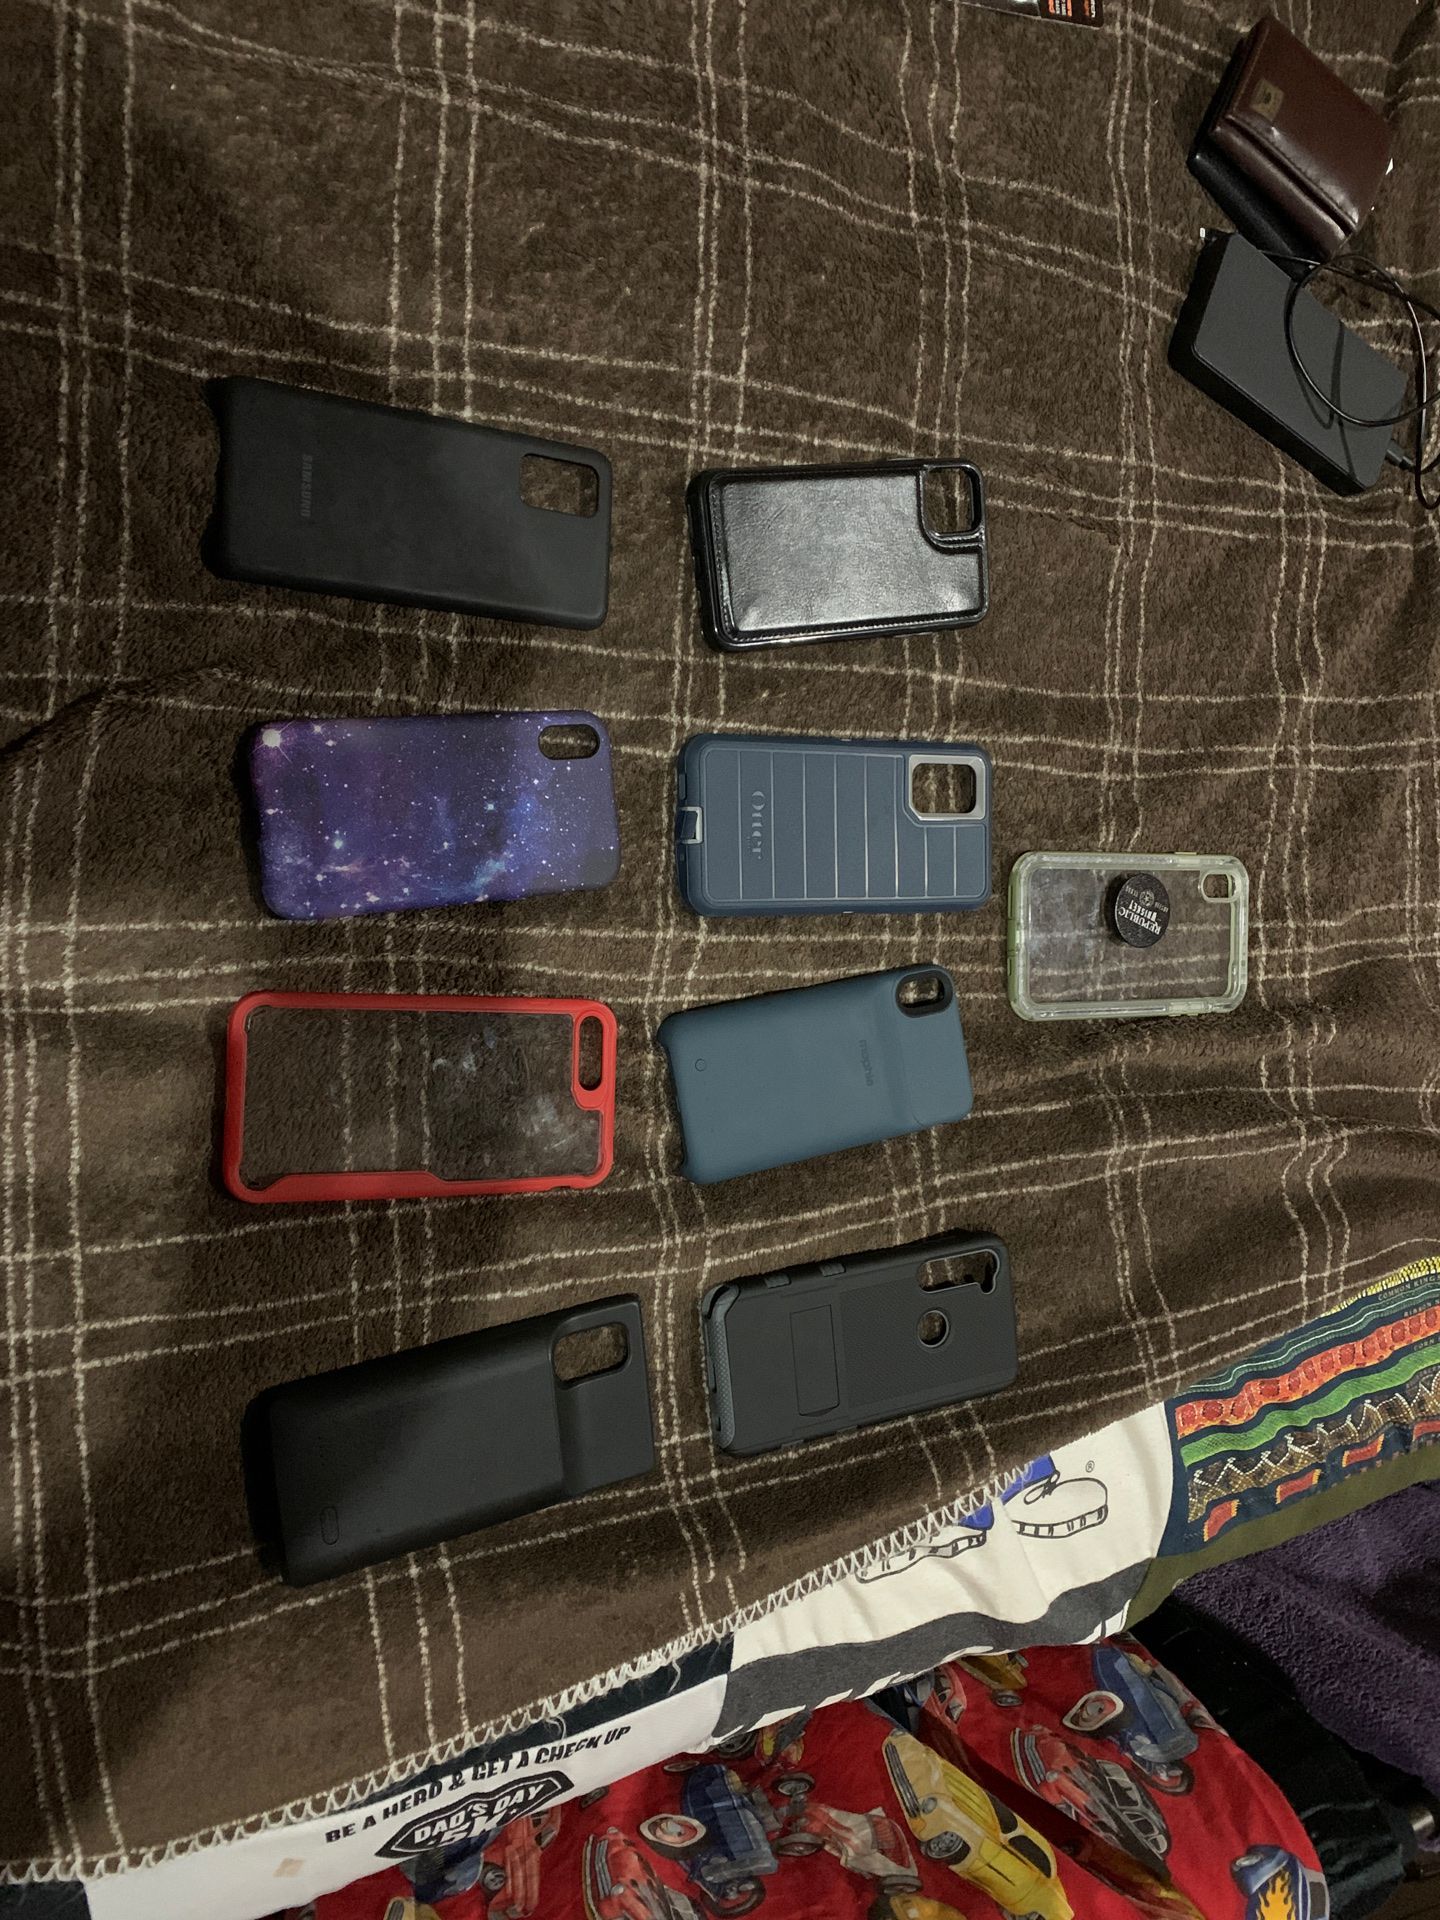 Phone cases for the Motorola g stylus, Samsung s20+, note 10+, iPhone xs max